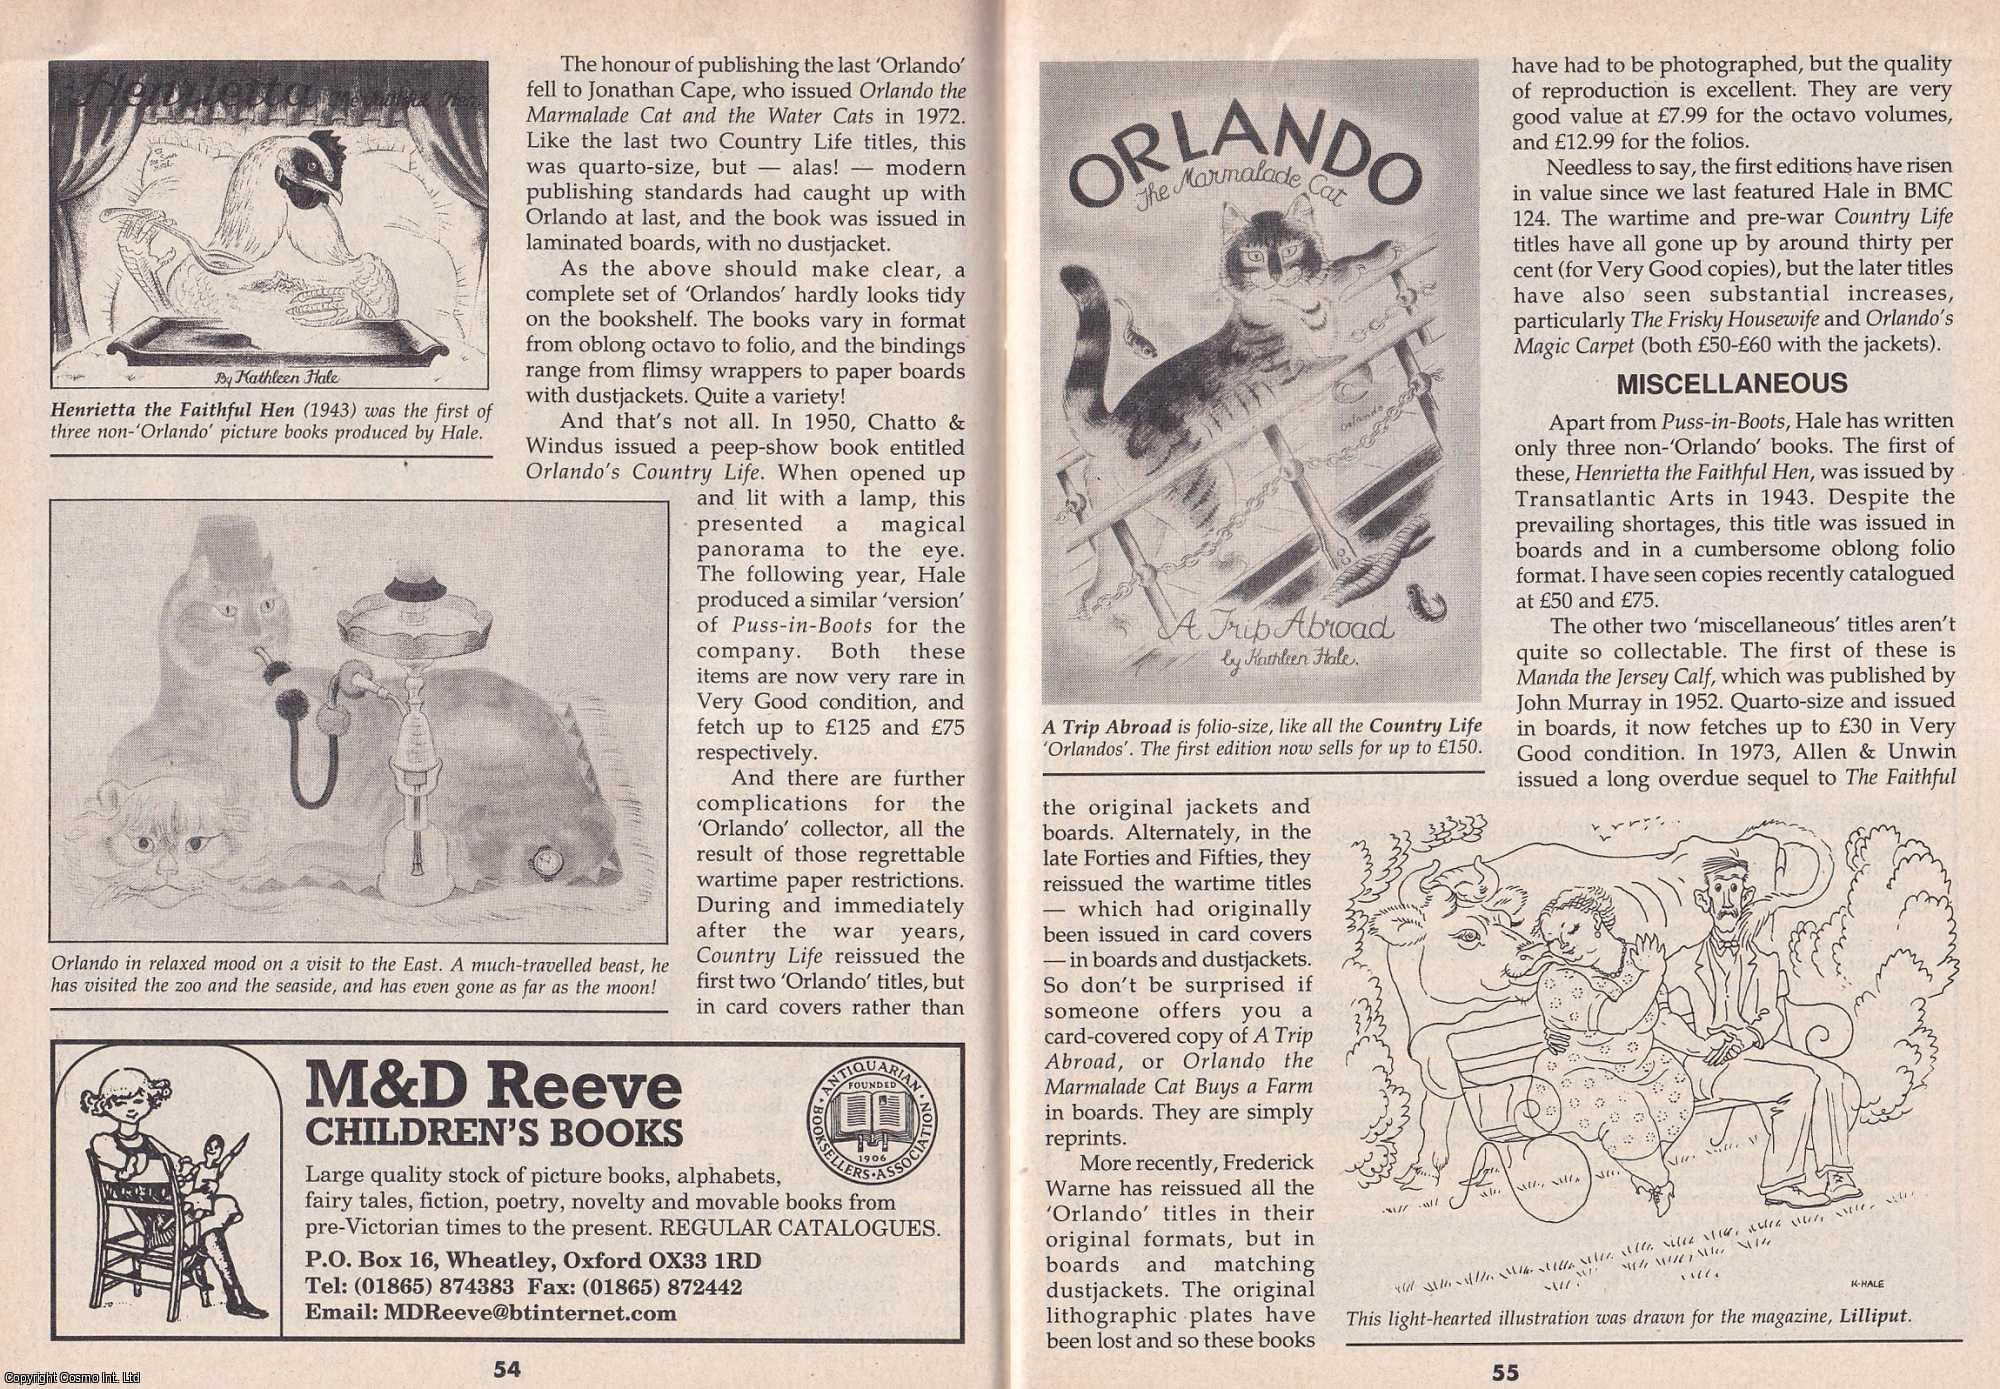 Crispin Jackson - Kathleen Hale : The Creator of Orlando The Marmalade Cat. This is an original article separated from an issue of The Book & Magazine Collector publication.